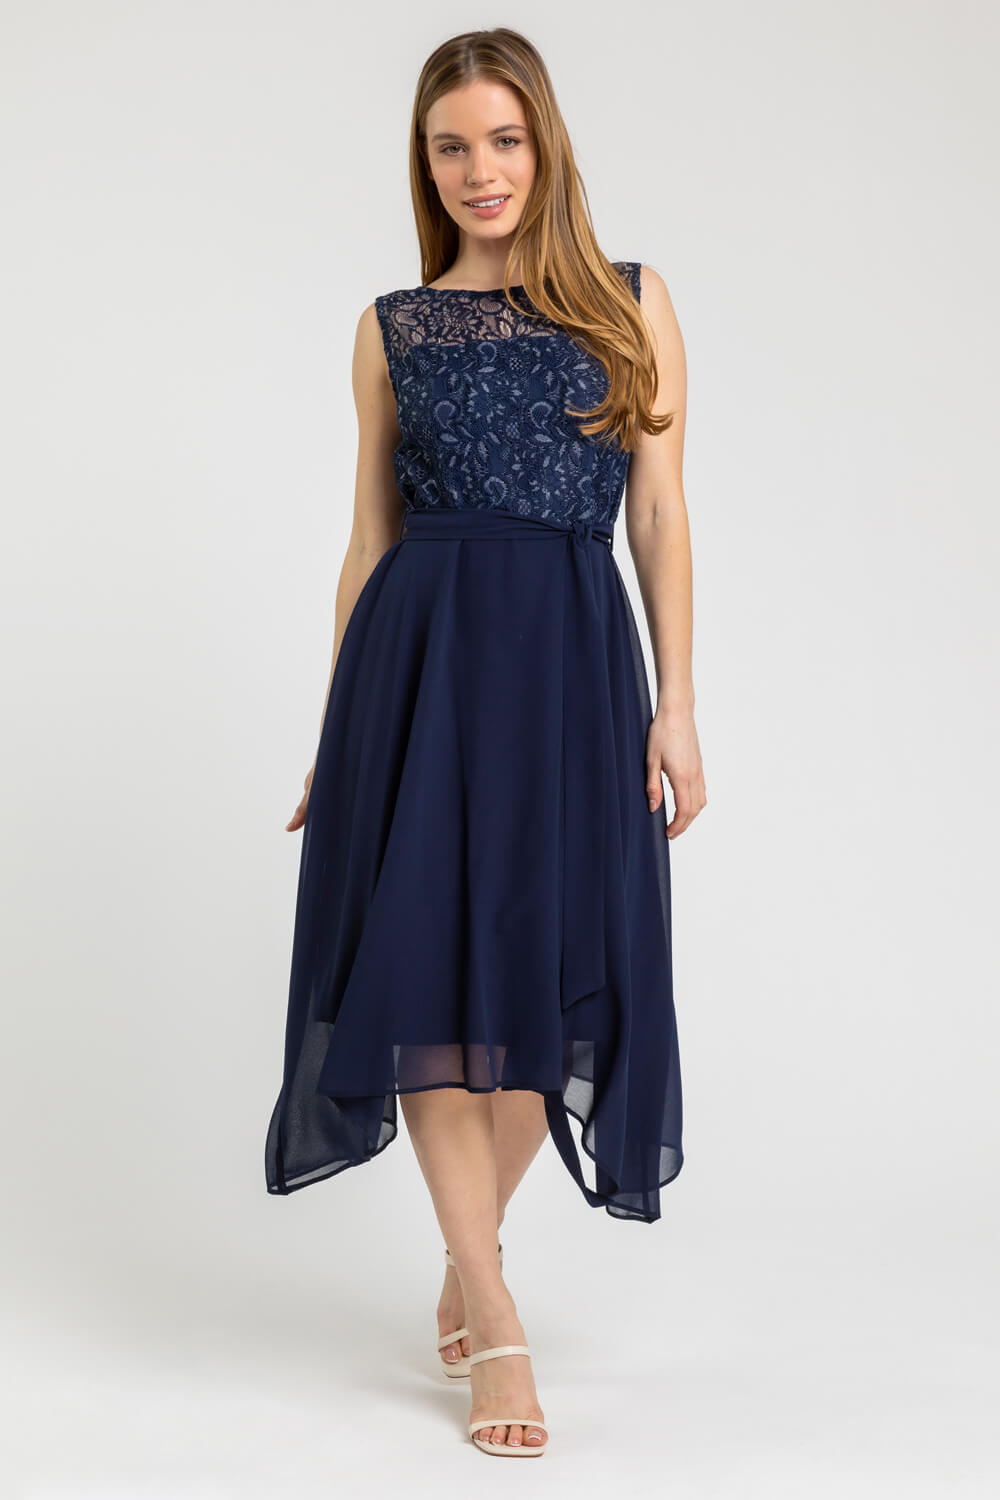 Petite Lace Detail Fit And Flare Dress in Navy | Roman UK